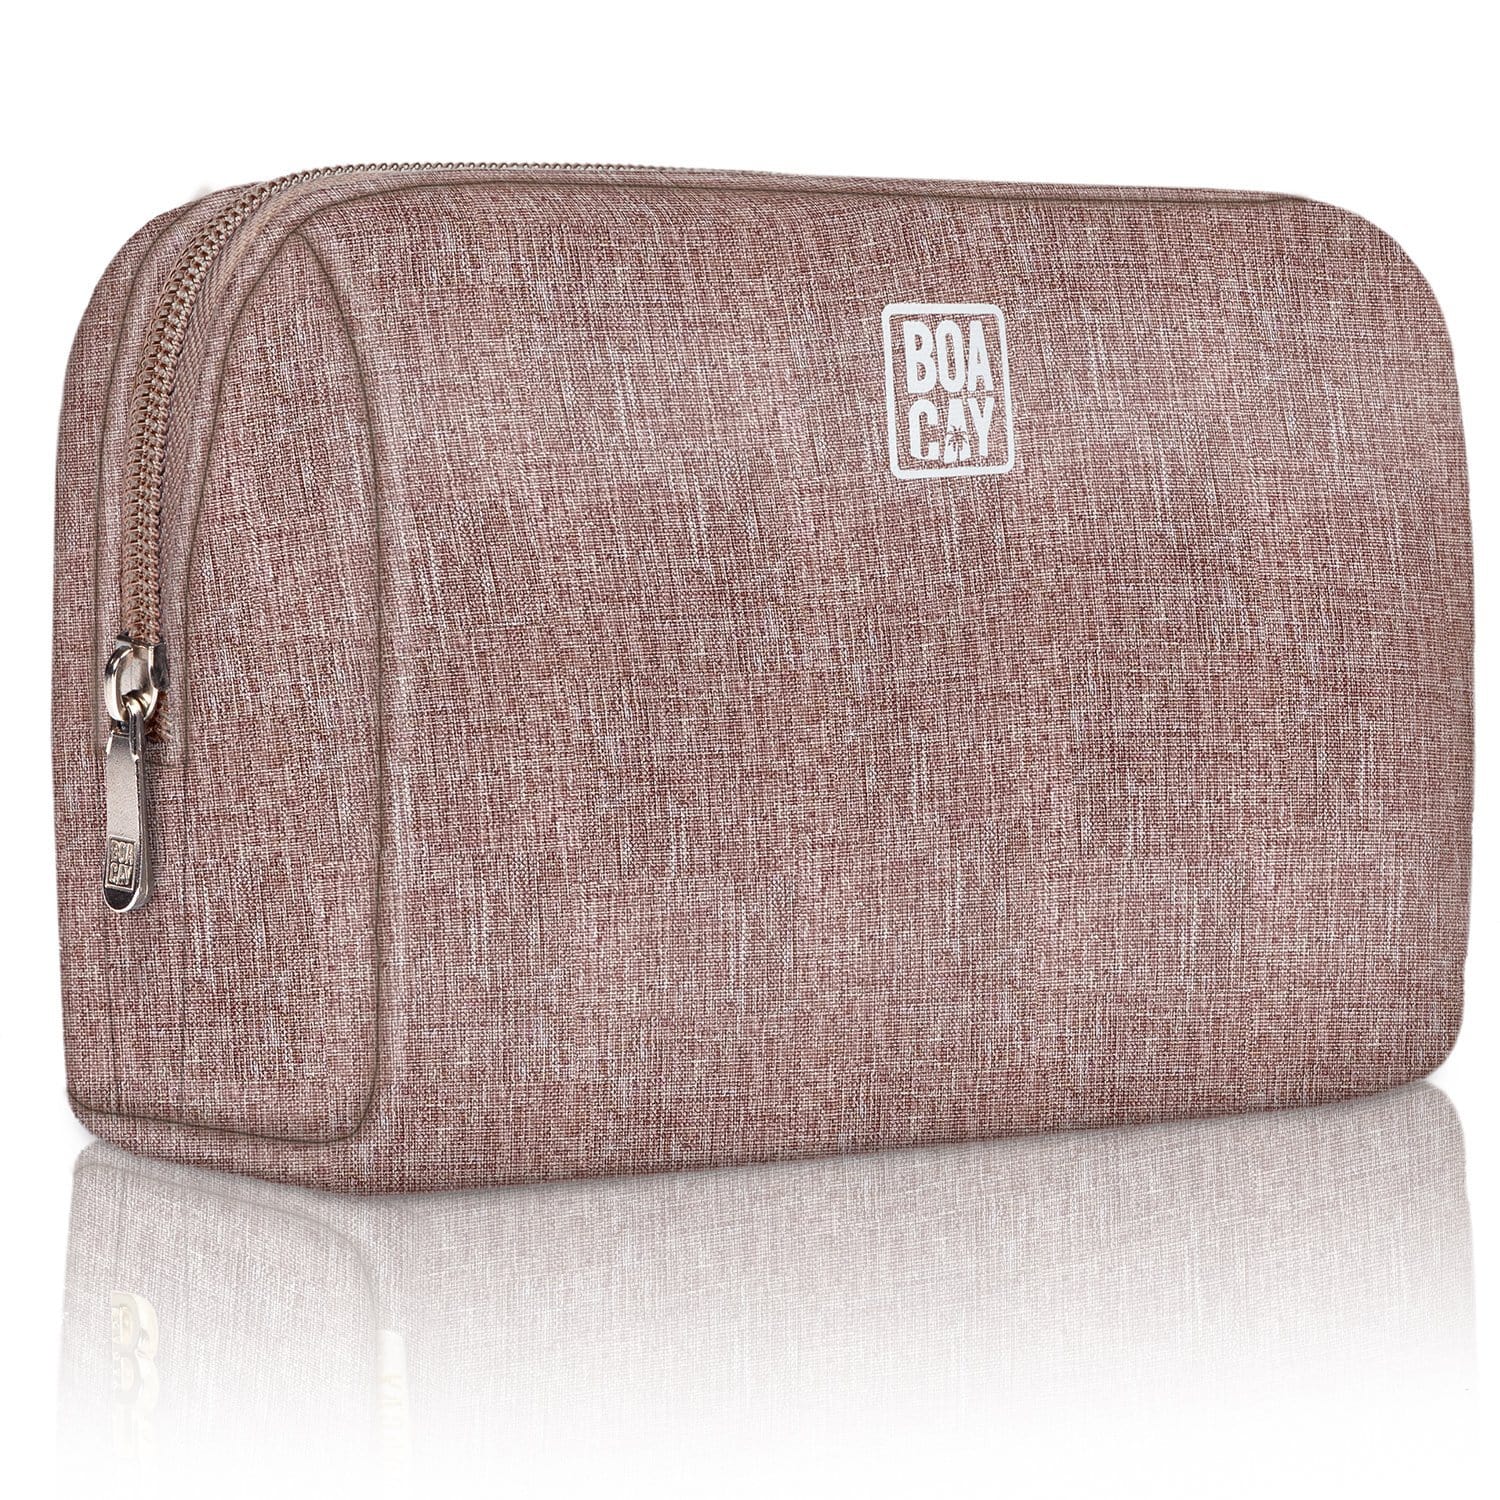 Brown Travel Toiletry Bag with multiple compartments for a perfect organization of your cosmetics. It is waterproof and perfect for travel, camping or business trips. Practical and Portable, this cosmetic bag is ideal for home use, but you can also fit it in your purse when you are on the go.